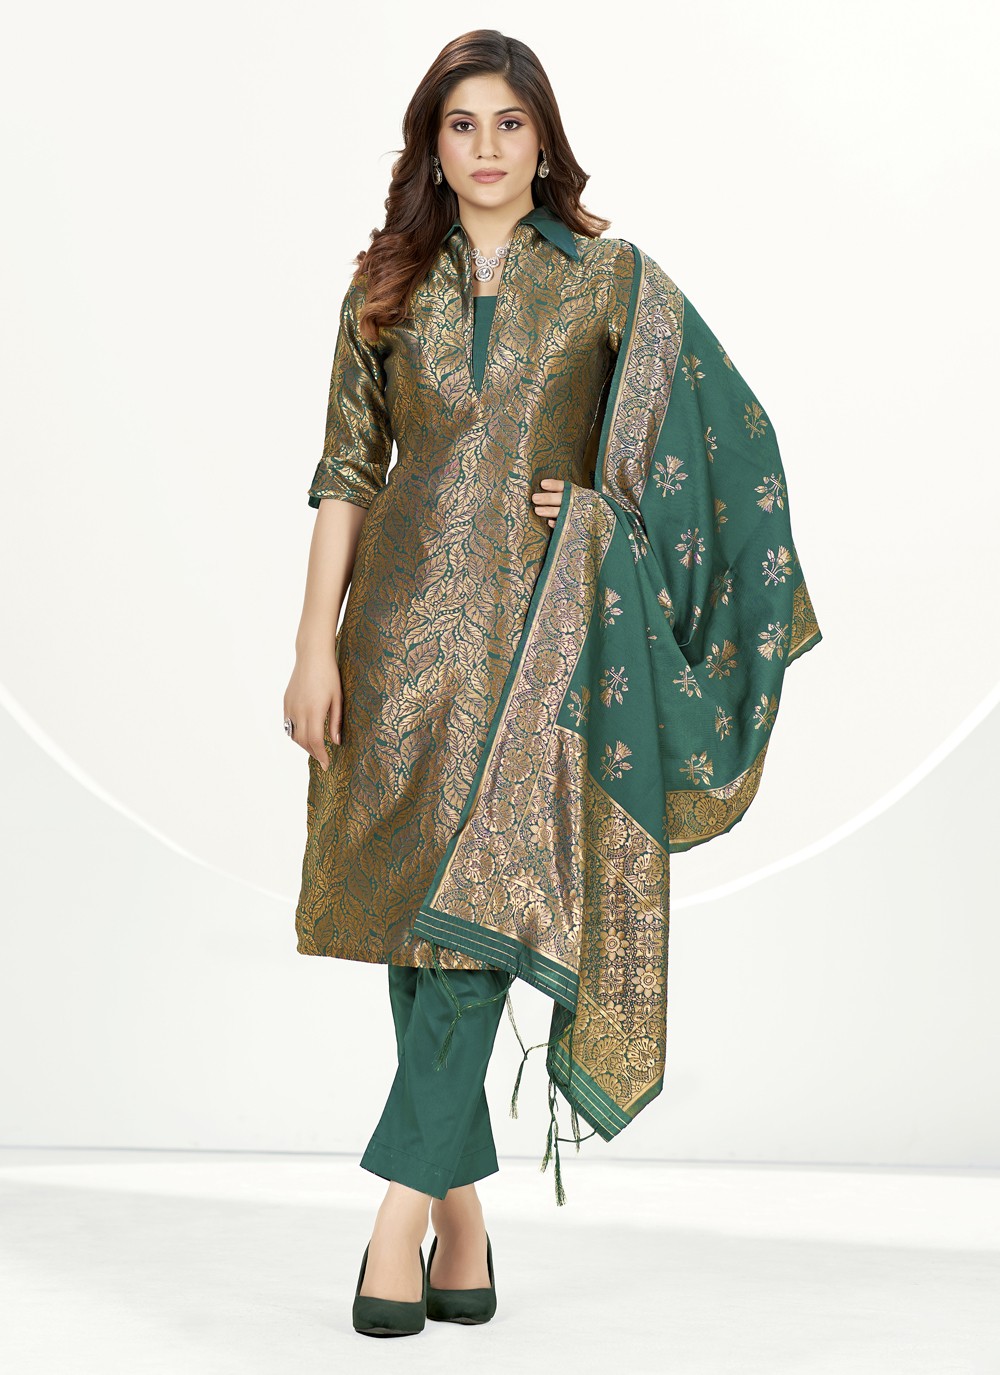 Silai Bunai Women Black Yoke Design Kurta with Trousers & With Dupatta  Price in India, Full Specifications & Offers | DTashion.com